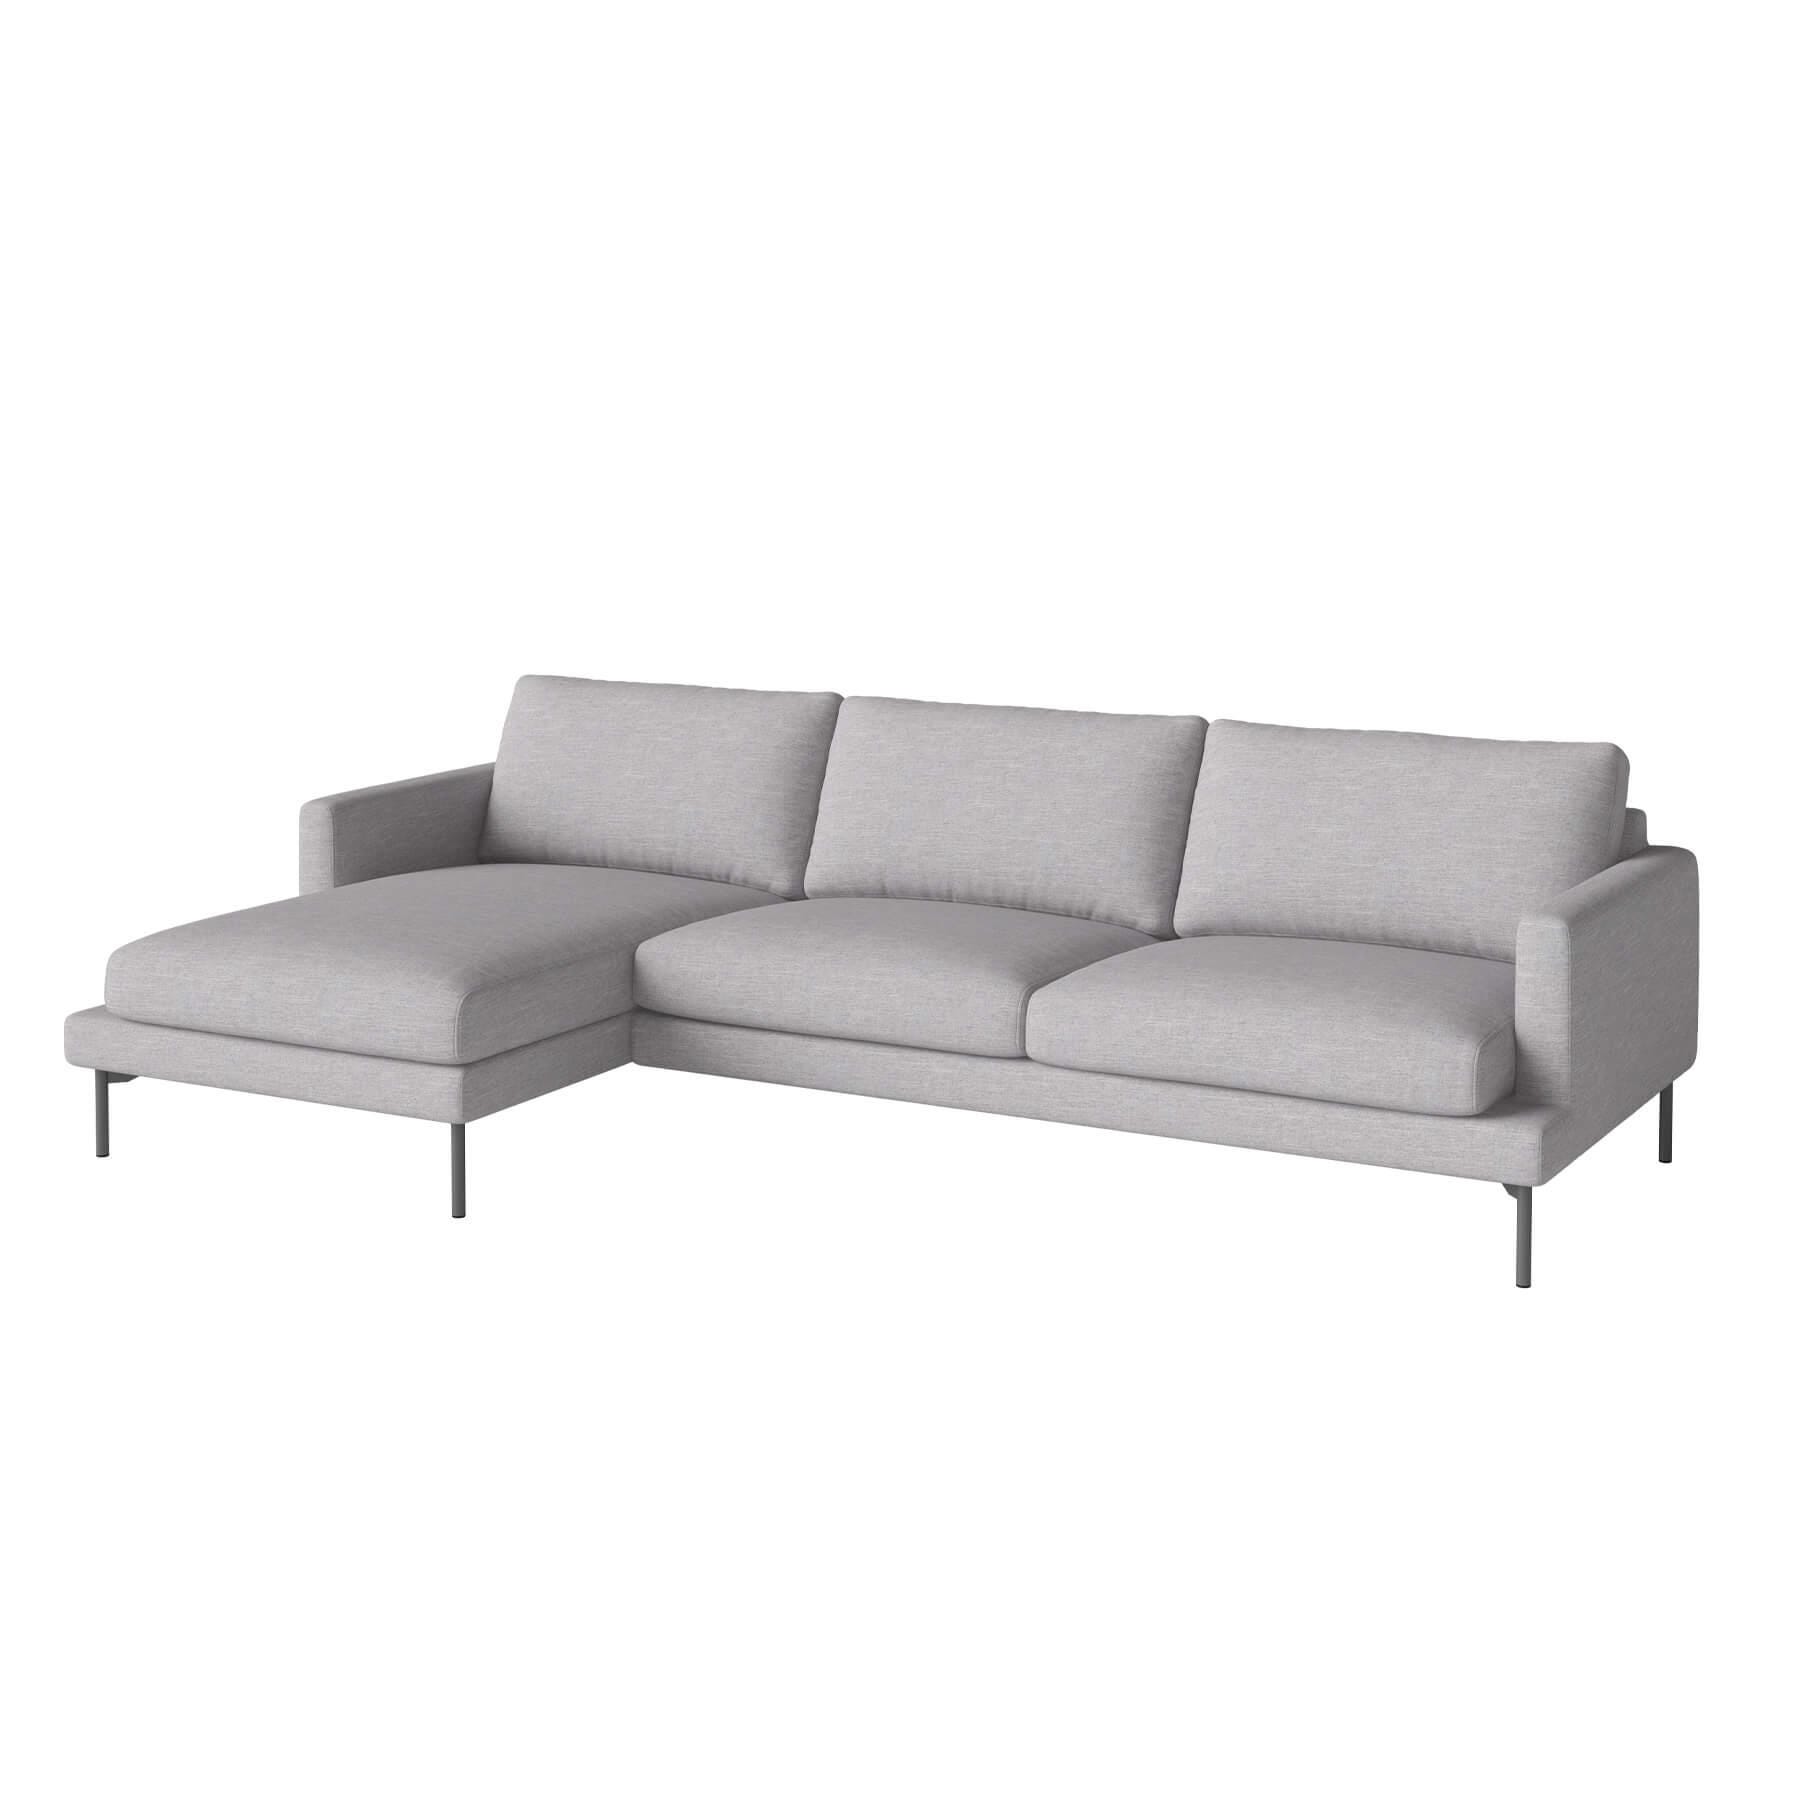 Bolia Veneda Sofa 35 Seater Sofa With Chaise Longue Grey Laquered Steel Baize Light Grey Left Designer Furniture From Holloways Of Ludlow